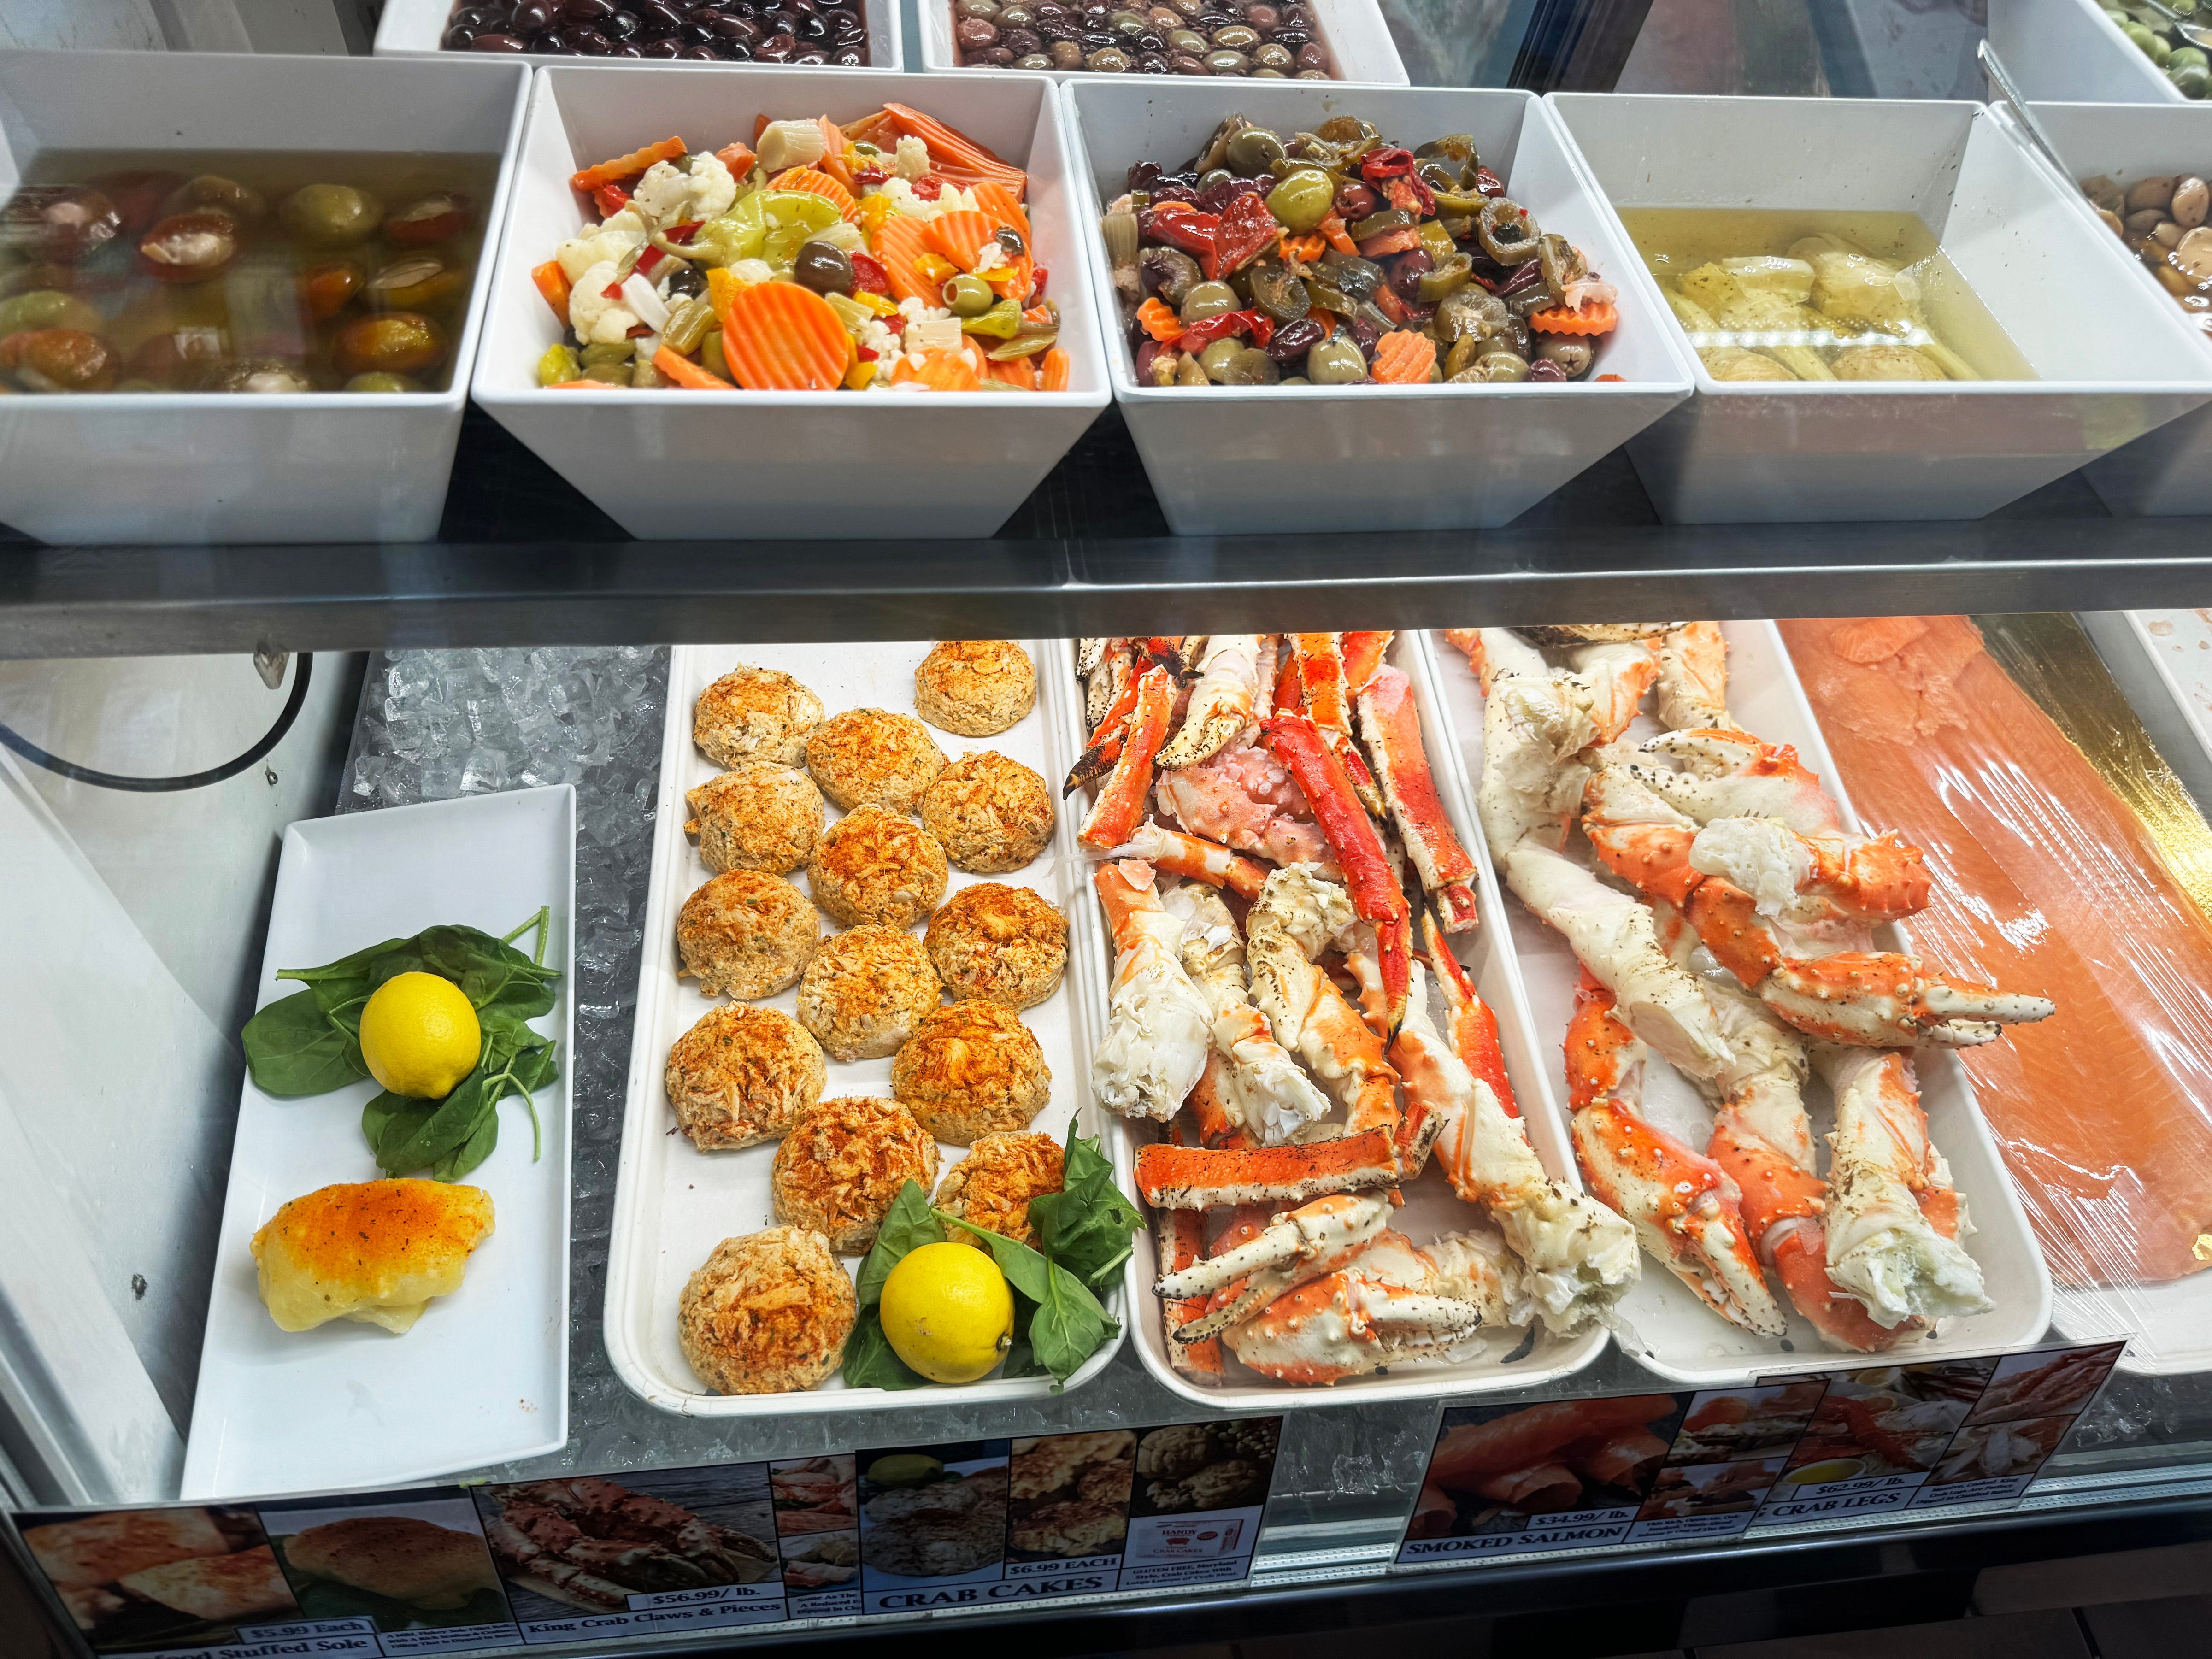 Blue cheese olives, giardiniera mixes, artichoke hearts (top shelf, front); assorted olives (top shelf, back), stuffed sole, crab cakes, king crab legs and smoked salmon (lower shelf).